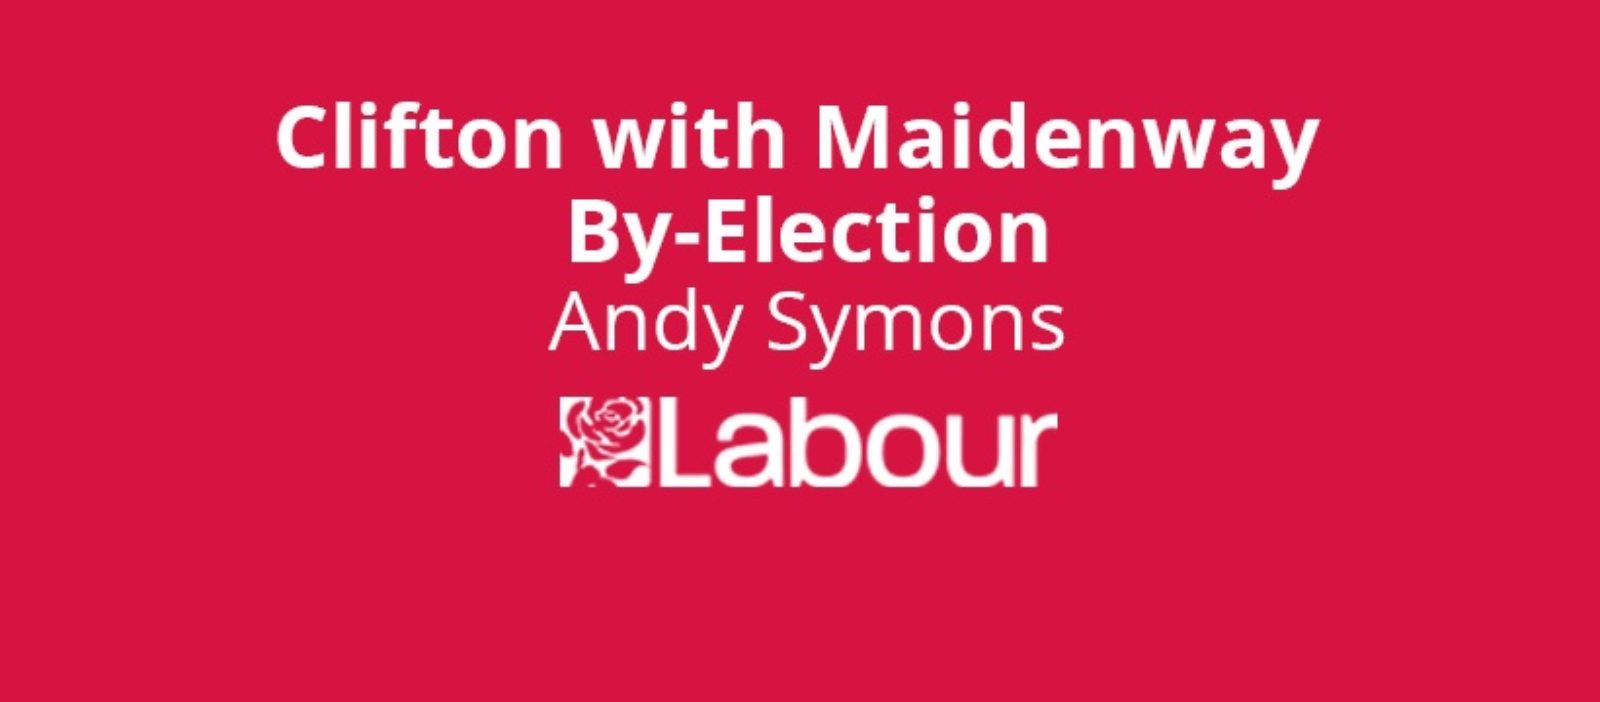 By-Election Campaign